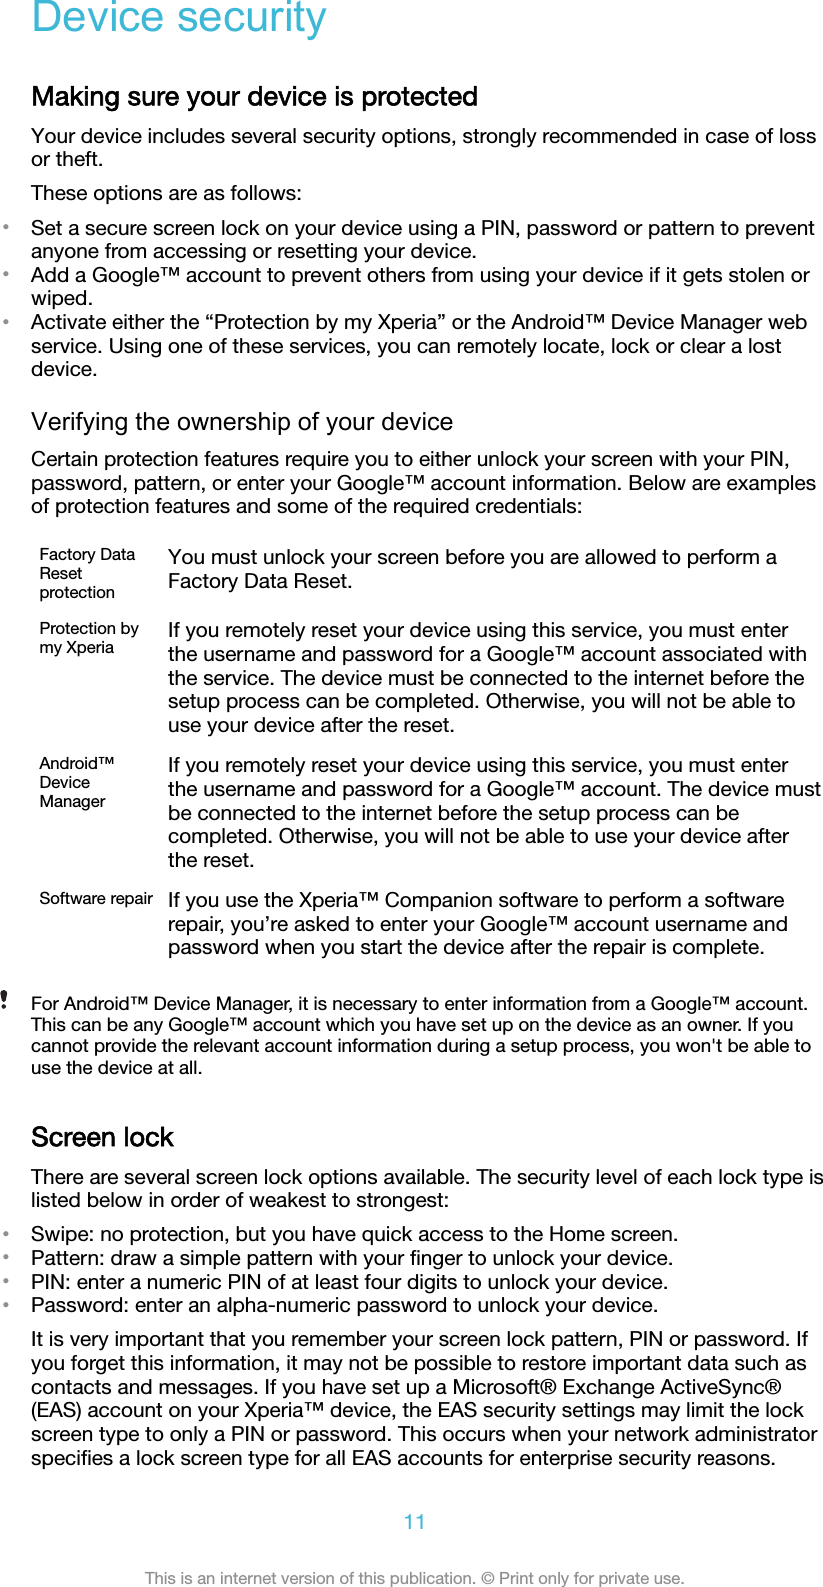 Device securityMaking sure your device is protectedYour device includes several security options, strongly recommended in case of lossor theft.These options are as follows:•Set a secure screen lock on your device using a PIN, password or pattern to preventanyone from accessing or resetting your device.•Add a Google™ account to prevent others from using your device if it gets stolen orwiped.•Activate either the “Protection by my Xperia” or the Android™ Device Manager webservice. Using one of these services, you can remotely locate, lock or clear a lostdevice.Verifying the ownership of your deviceCertain protection features require you to either unlock your screen with your PIN,password, pattern, or enter your Google™ account information. Below are examplesof protection features and some of the required credentials:Factory DataResetprotectionYou must unlock your screen before you are allowed to perform aFactory Data Reset.Protection bymy Xperia If you remotely reset your device using this service, you must enterthe username and password for a Google™ account associated withthe service. The device must be connected to the internet before thesetup process can be completed. Otherwise, you will not be able touse your device after the reset.Android™DeviceManagerIf you remotely reset your device using this service, you must enterthe username and password for a Google™ account. The device mustbe connected to the internet before the setup process can becompleted. Otherwise, you will not be able to use your device afterthe reset.Software repair If you use the Xperia™ Companion software to perform a softwarerepair, you’re asked to enter your Google™ account username andpassword when you start the device after the repair is complete.For Android™ Device Manager, it is necessary to enter information from a Google™ account.This can be any Google™ account which you have set up on the device as an owner. If youcannot provide the relevant account information during a setup process, you won&apos;t be able touse the device at all.Screen lockThere are several screen lock options available. The security level of each lock type islisted below in order of weakest to strongest:•Swipe: no protection, but you have quick access to the Home screen.•Pattern: draw a simple pattern with your ﬁnger to unlock your device.•PIN: enter a numeric PIN of at least four digits to unlock your device.•Password: enter an alpha-numeric password to unlock your device.It is very important that you remember your screen lock pattern, PIN or password. Ifyou forget this information, it may not be possible to restore important data such ascontacts and messages. If you have set up a Microsoft® Exchange ActiveSync®(EAS) account on your Xperia™ device, the EAS security settings may limit the lockscreen type to only a PIN or password. This occurs when your network administratorspeciﬁes a lock screen type for all EAS accounts for enterprise security reasons.11This is an internet version of this publication. © Print only for private use.